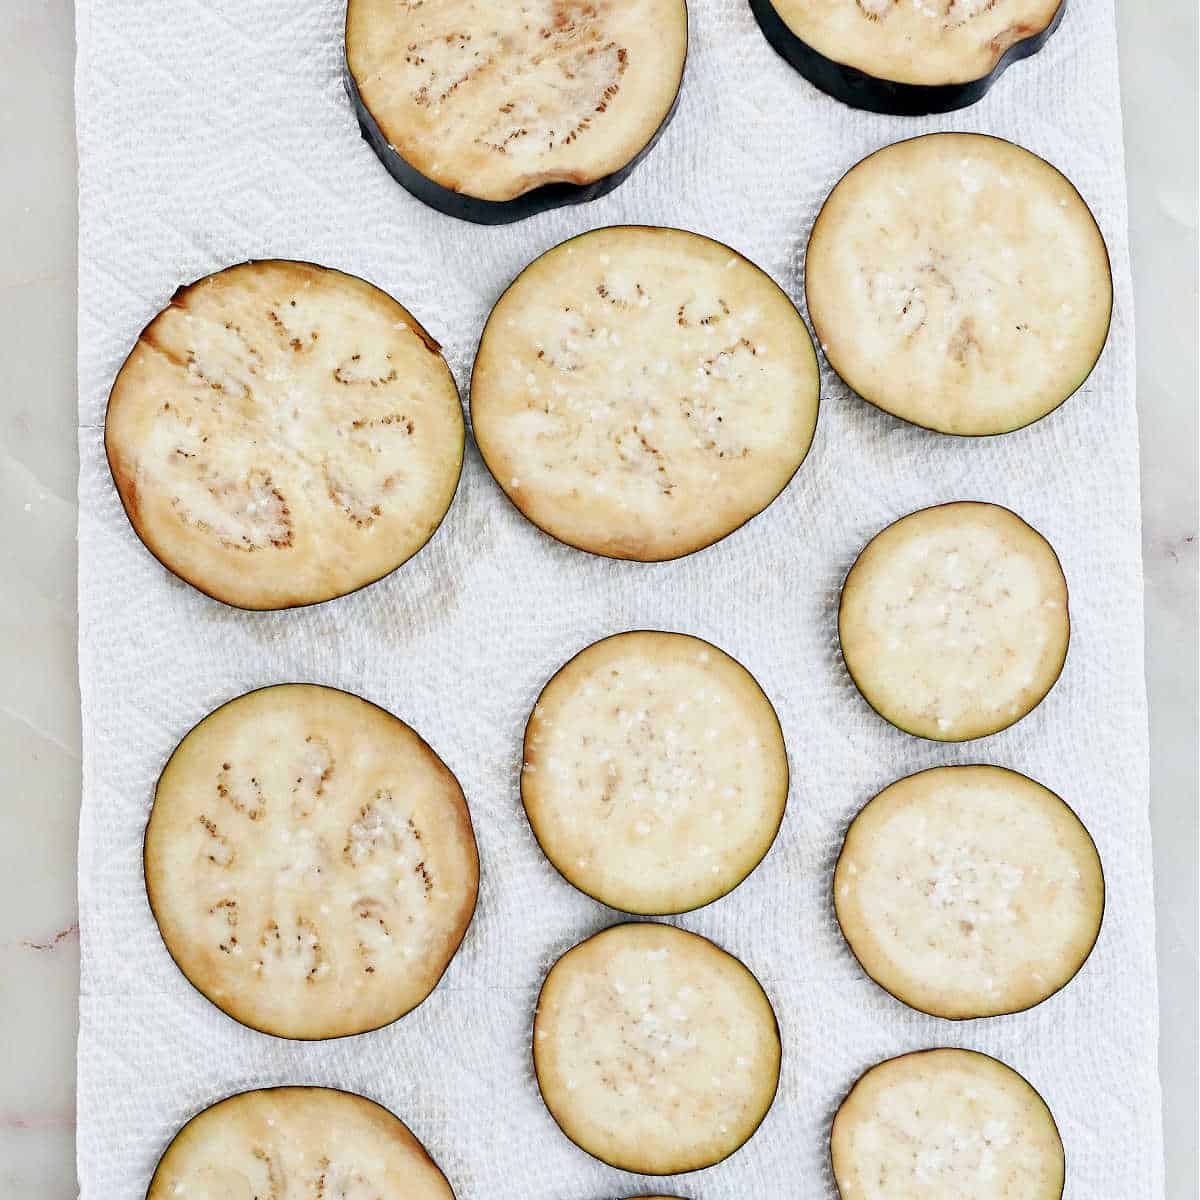 eggplant rounds sprinkled with salt and sweating on paper towels